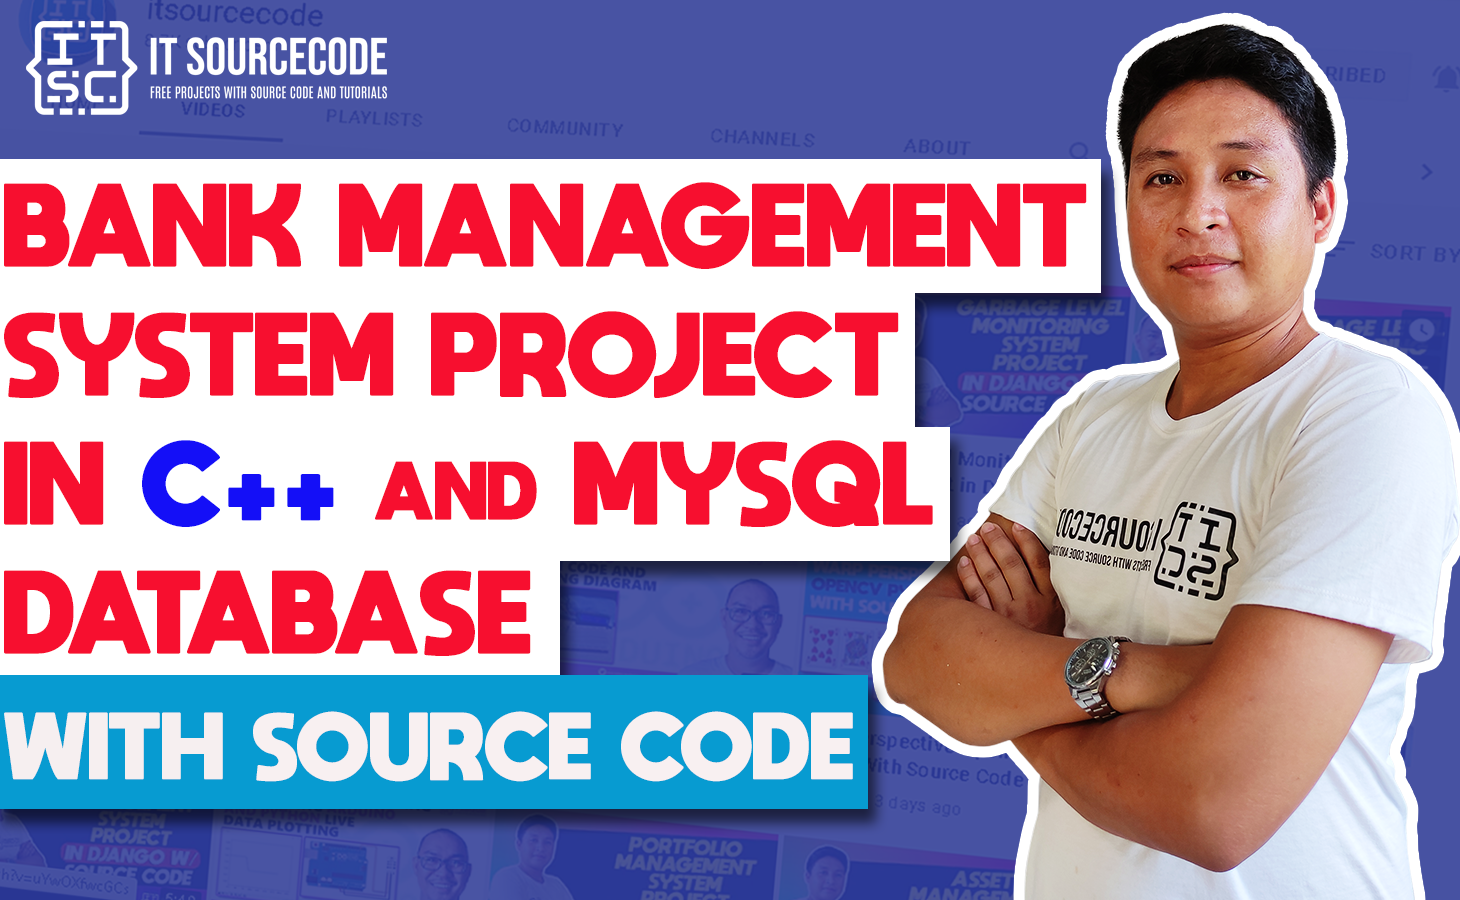 Bank Management System Project in C++ and MySQL Database